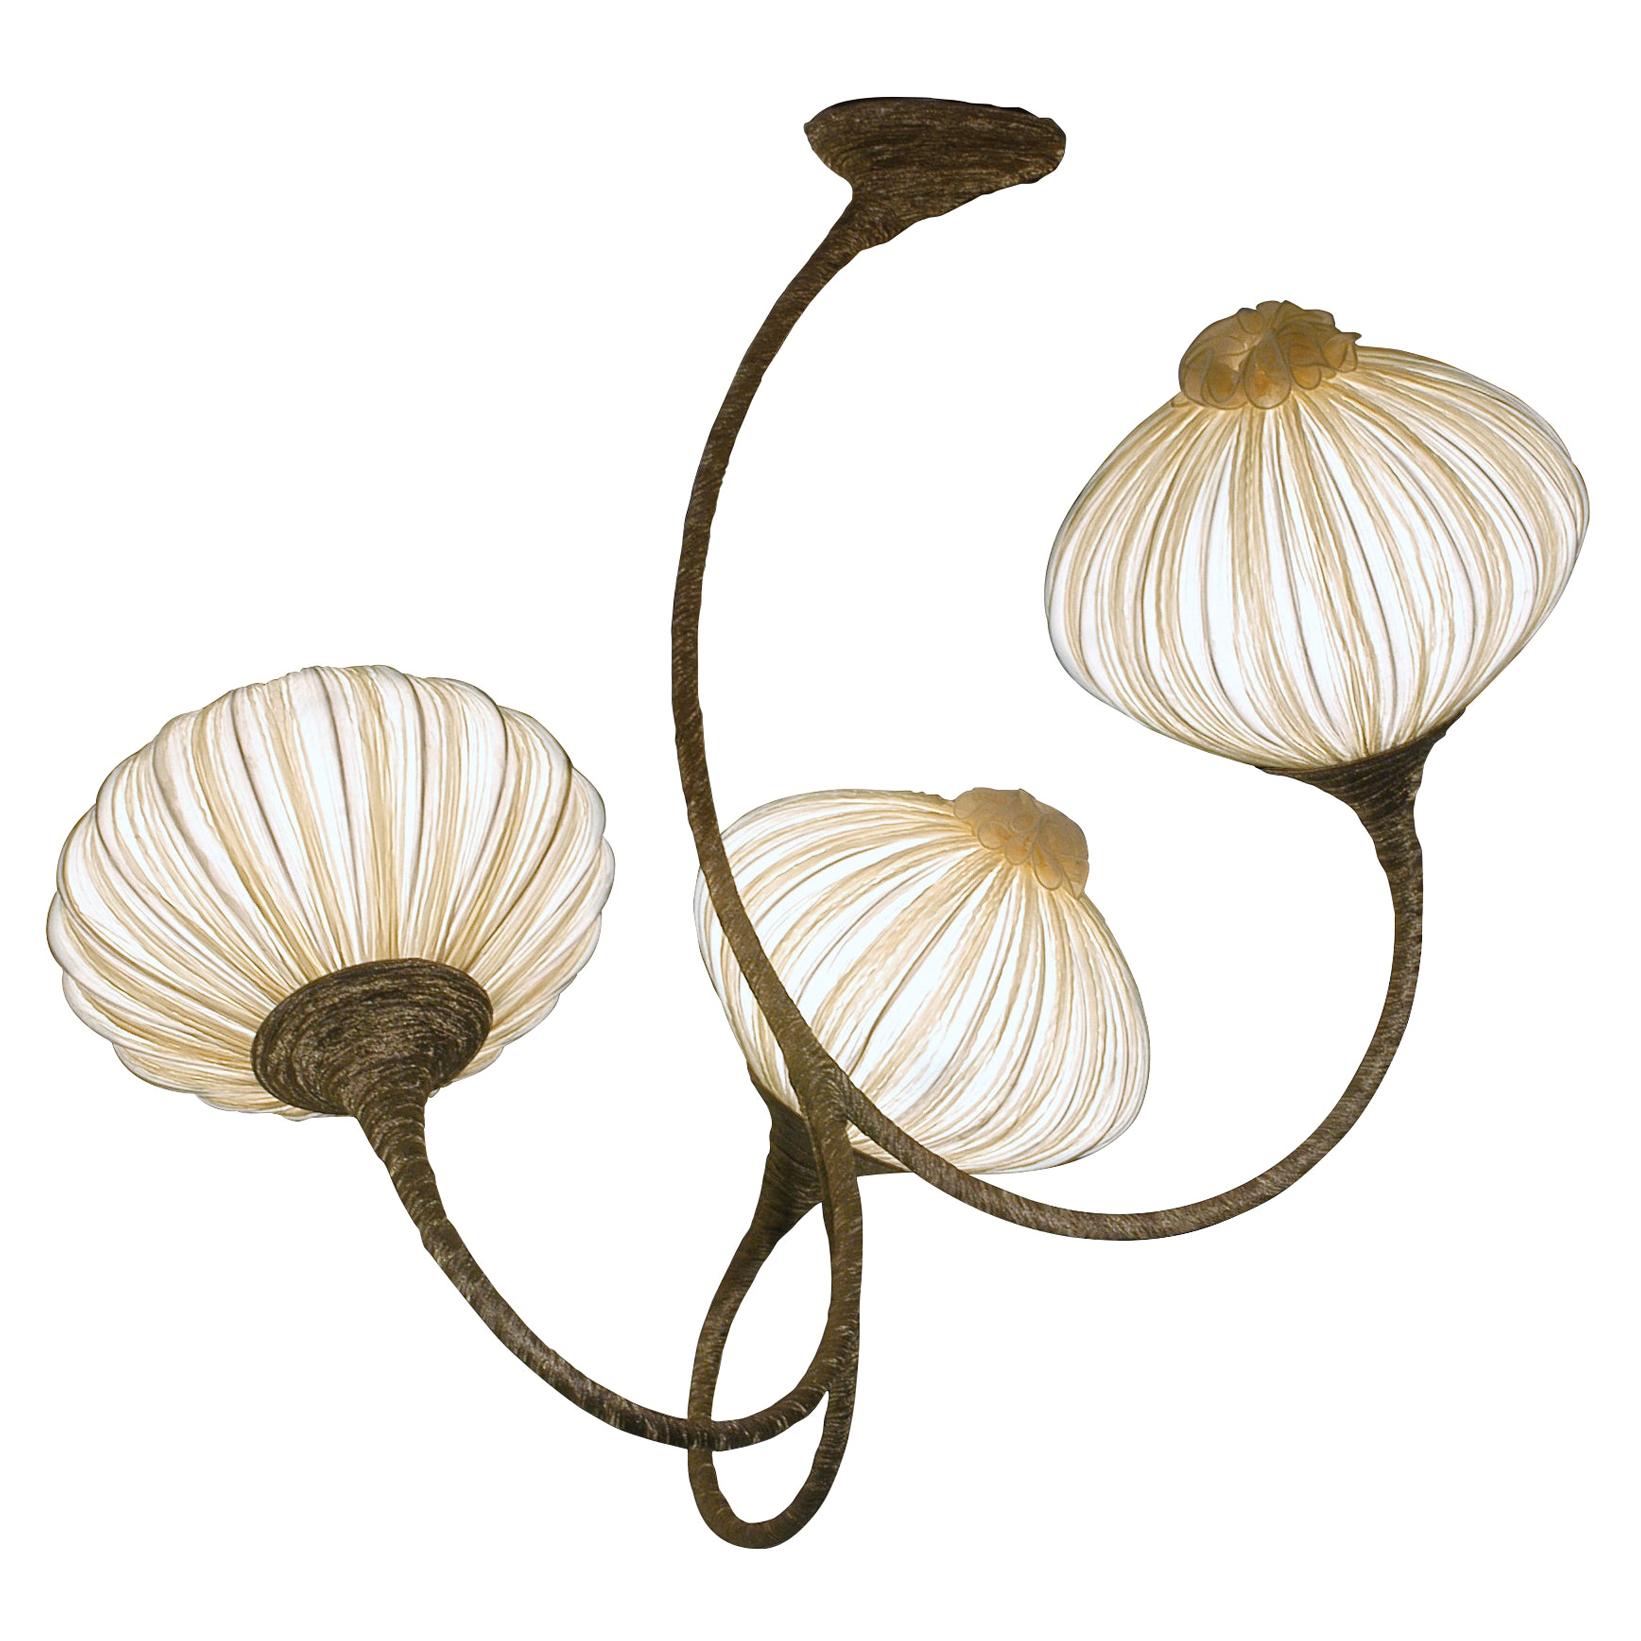 Silk and Organza over Metal "3 Palms" Chandelier by Aqua Creations For Sale